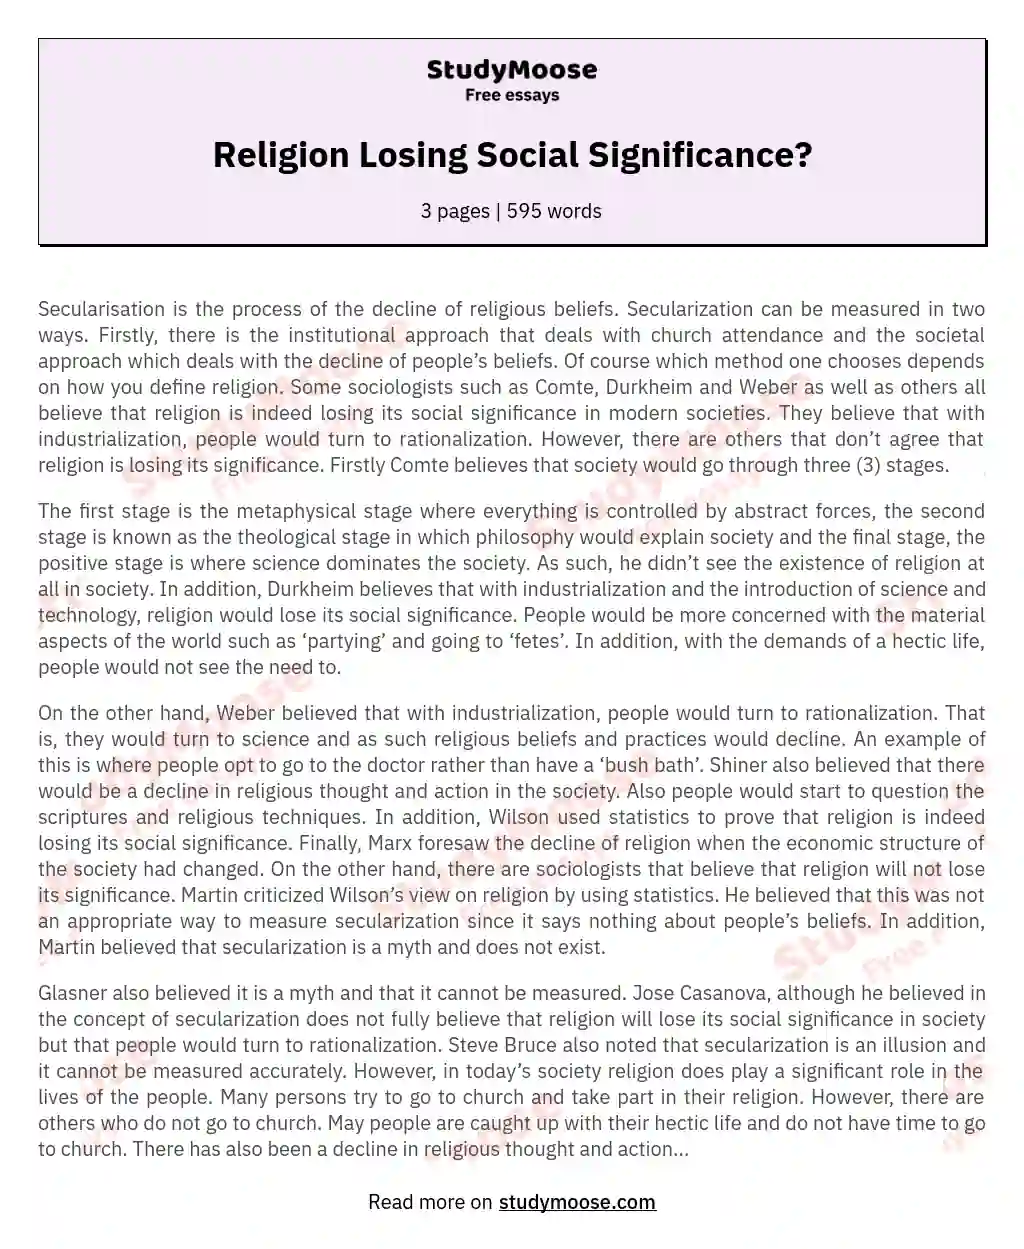 Discuss the Claim Made by Some Sociologists That in Modern Societies Religion Is Losing Its Social Significance